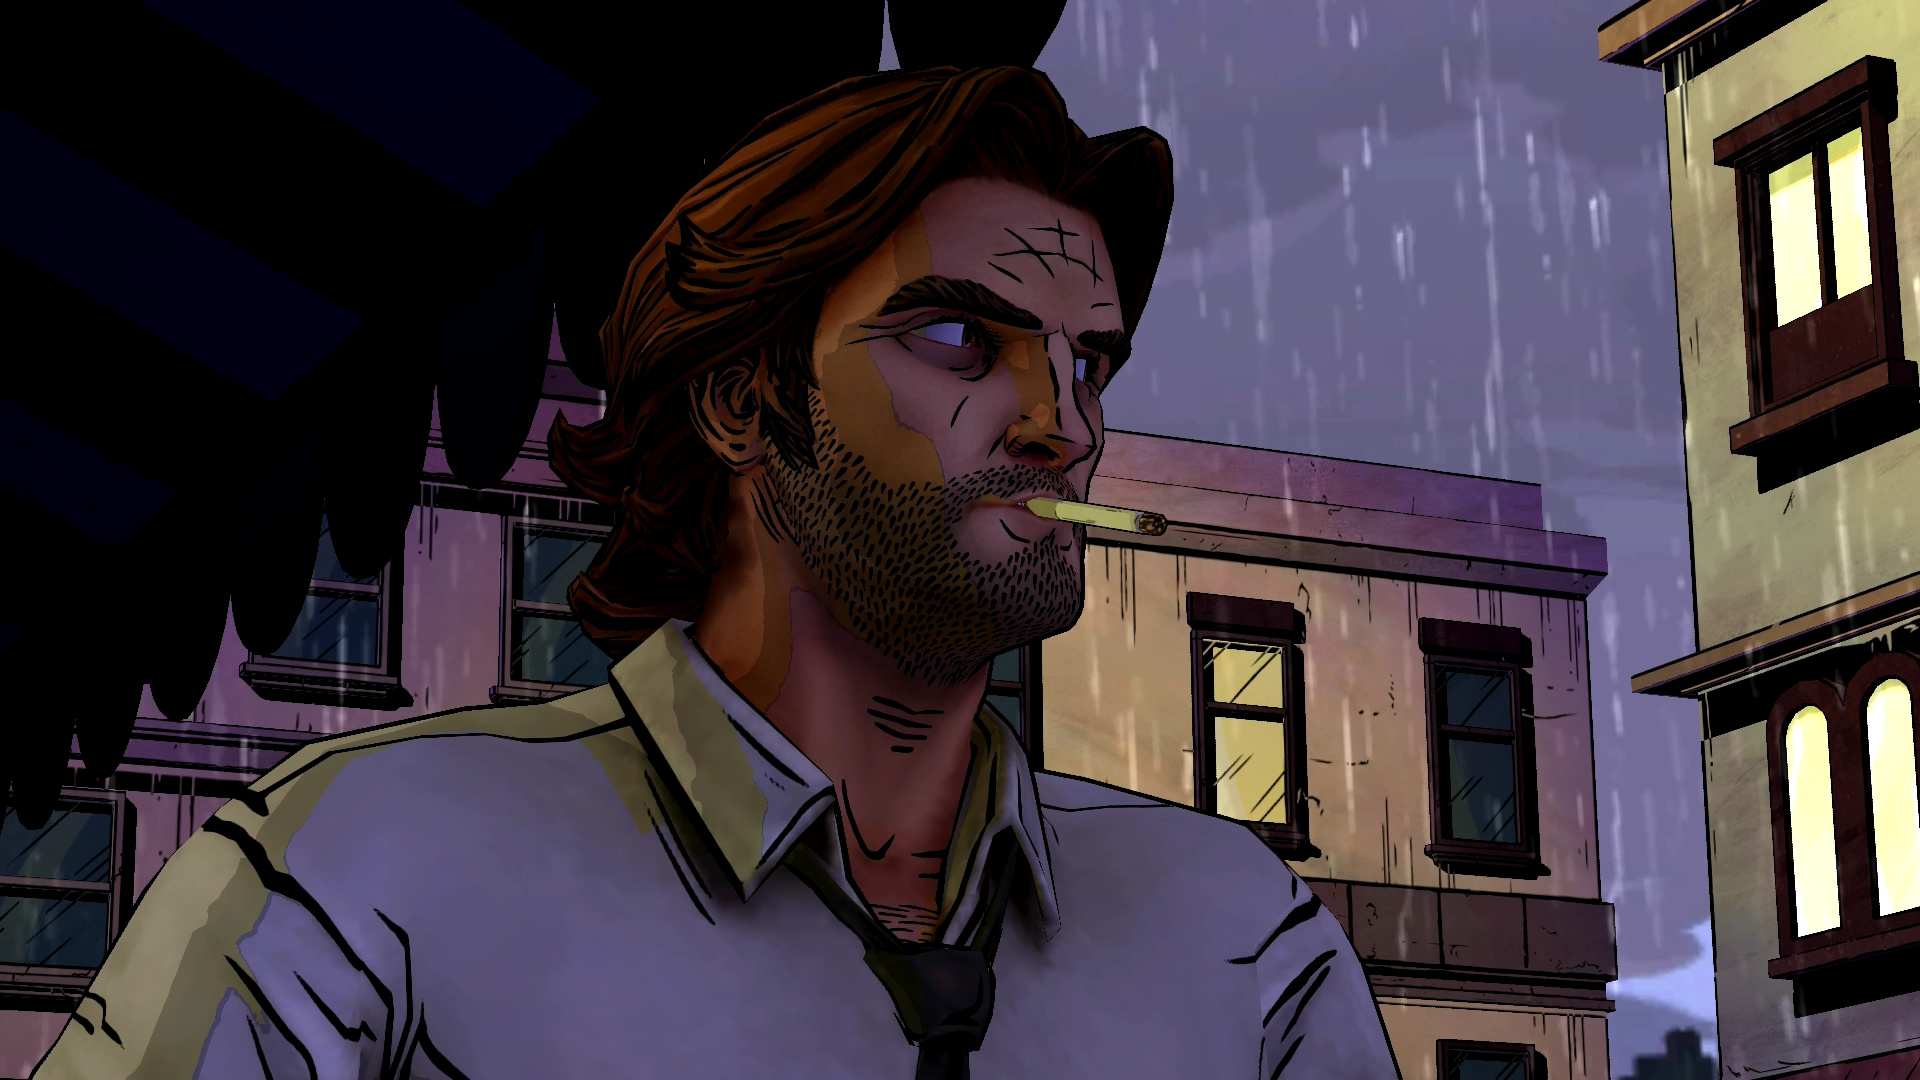 The Wolf Among Us instal the new version for windows